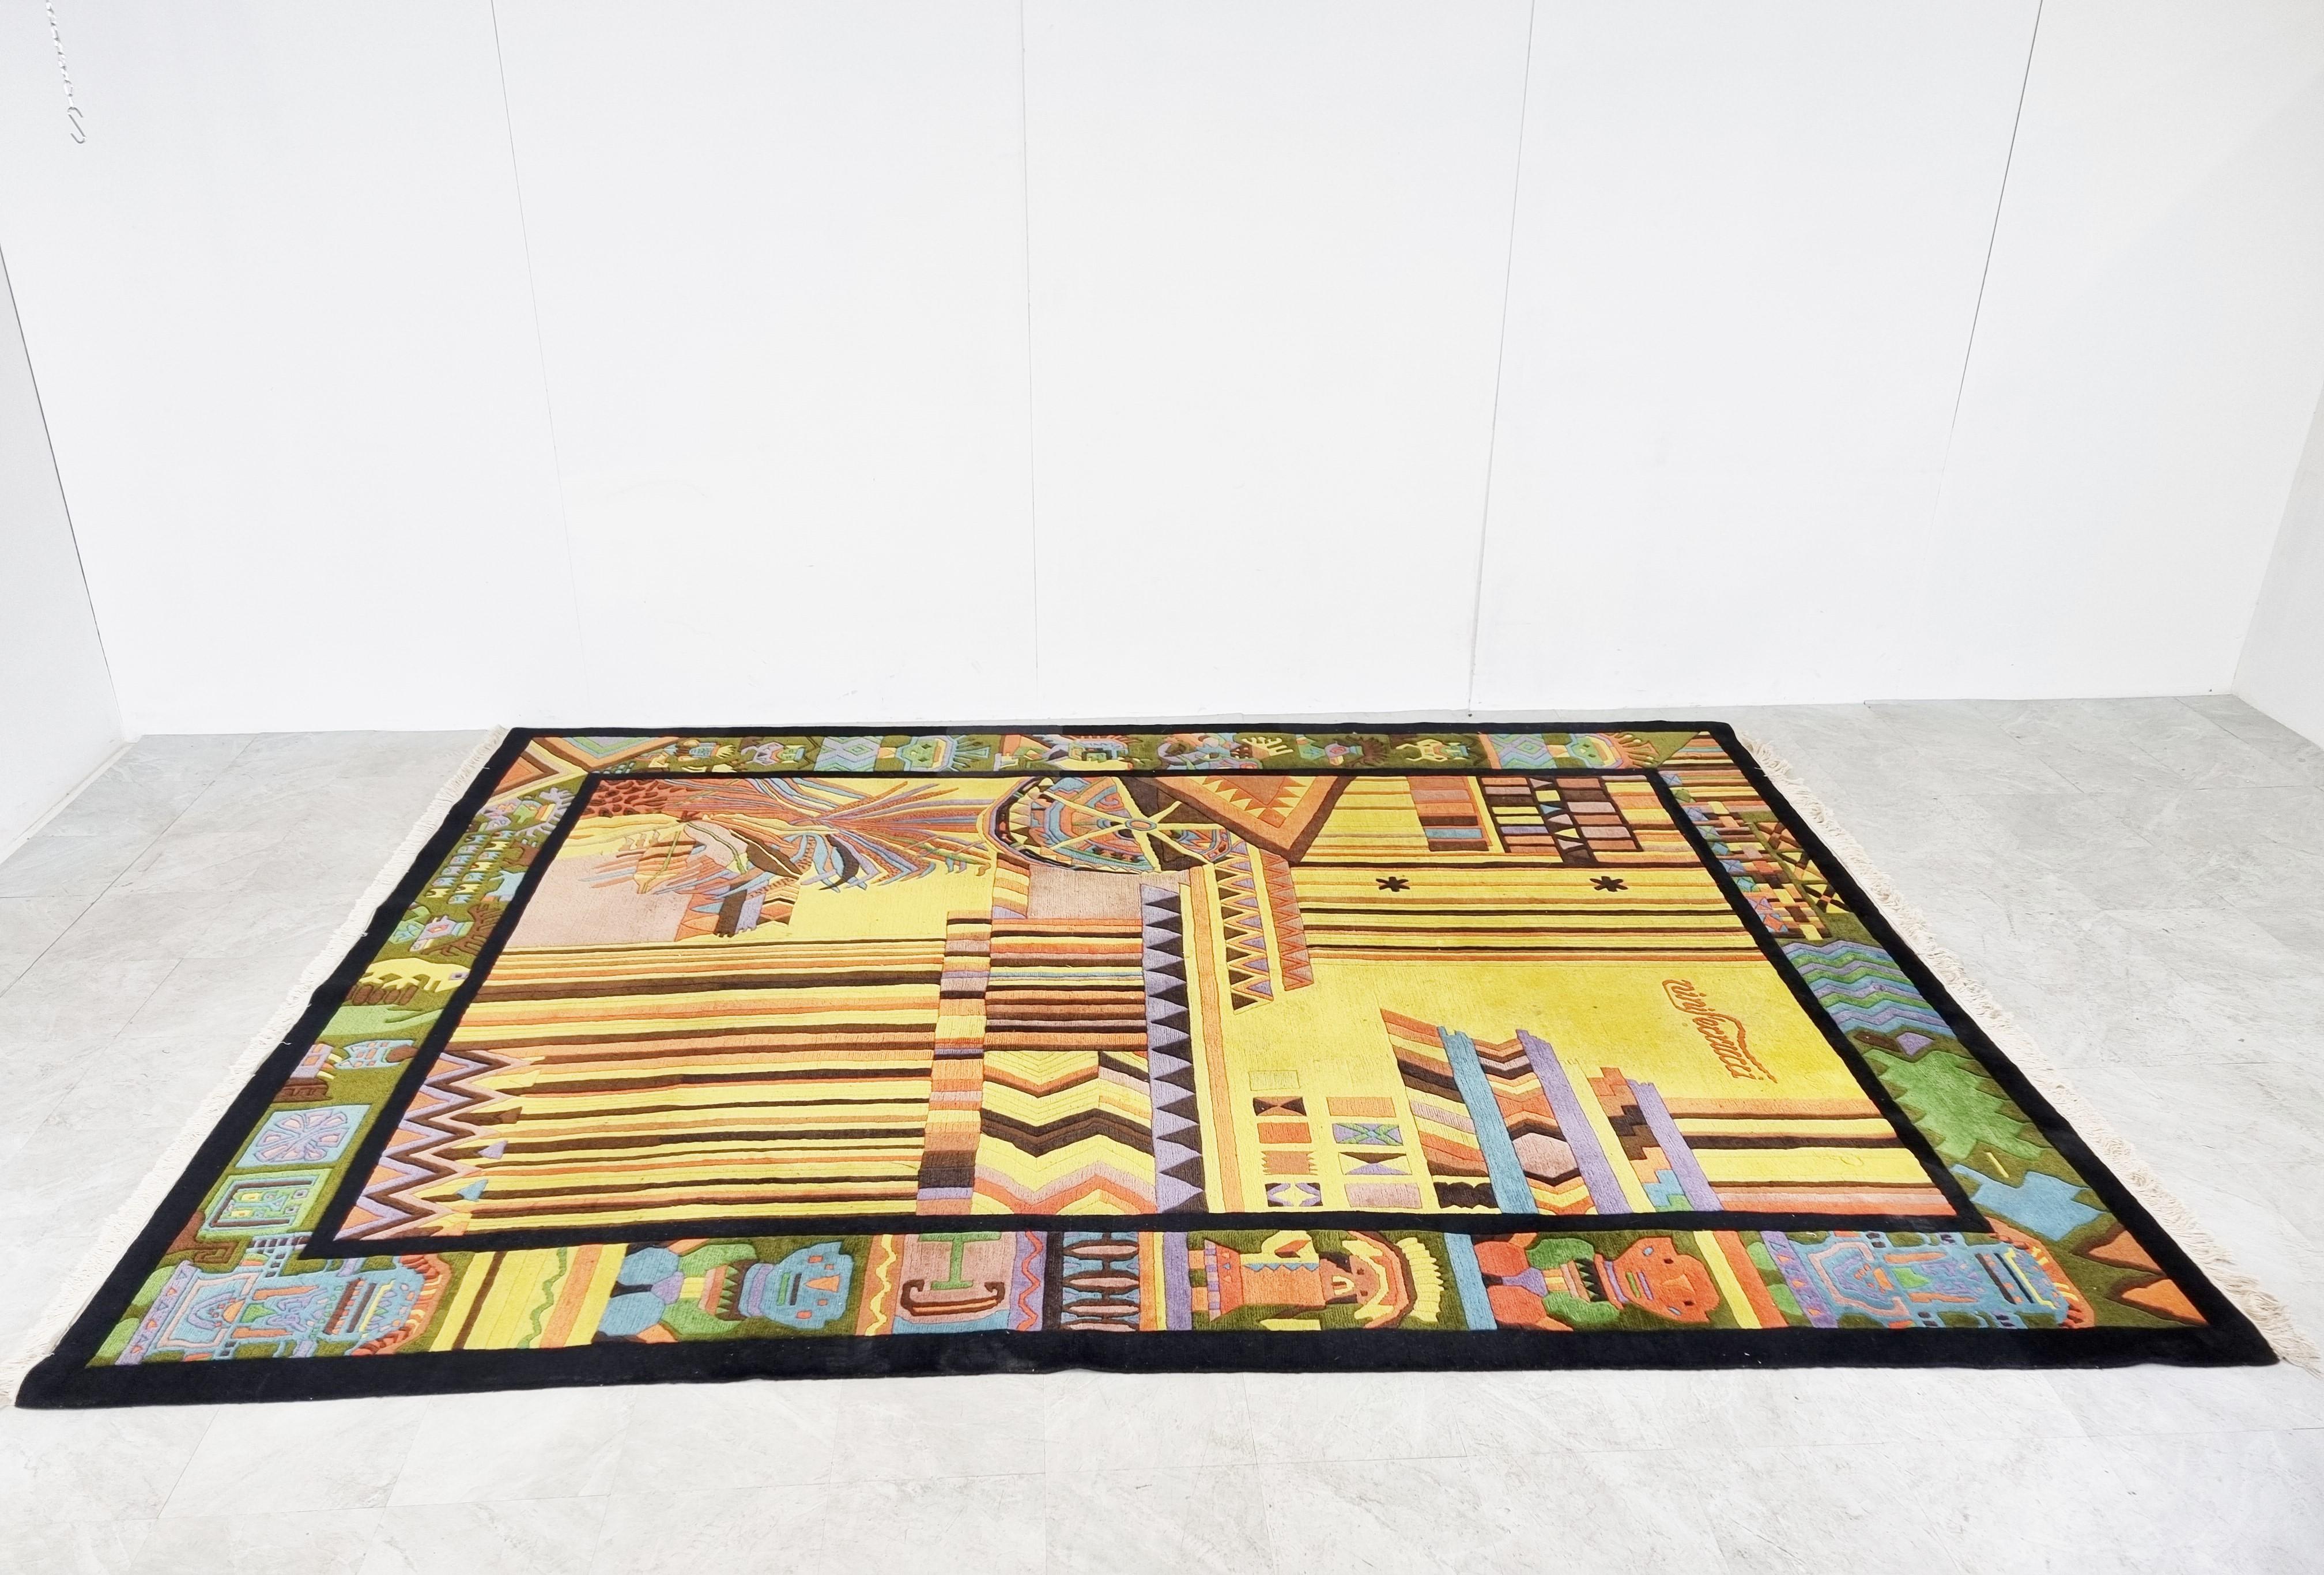 Late 20th Century Large Hand Knotte Carpet by Nini Ferrucci, 1990s